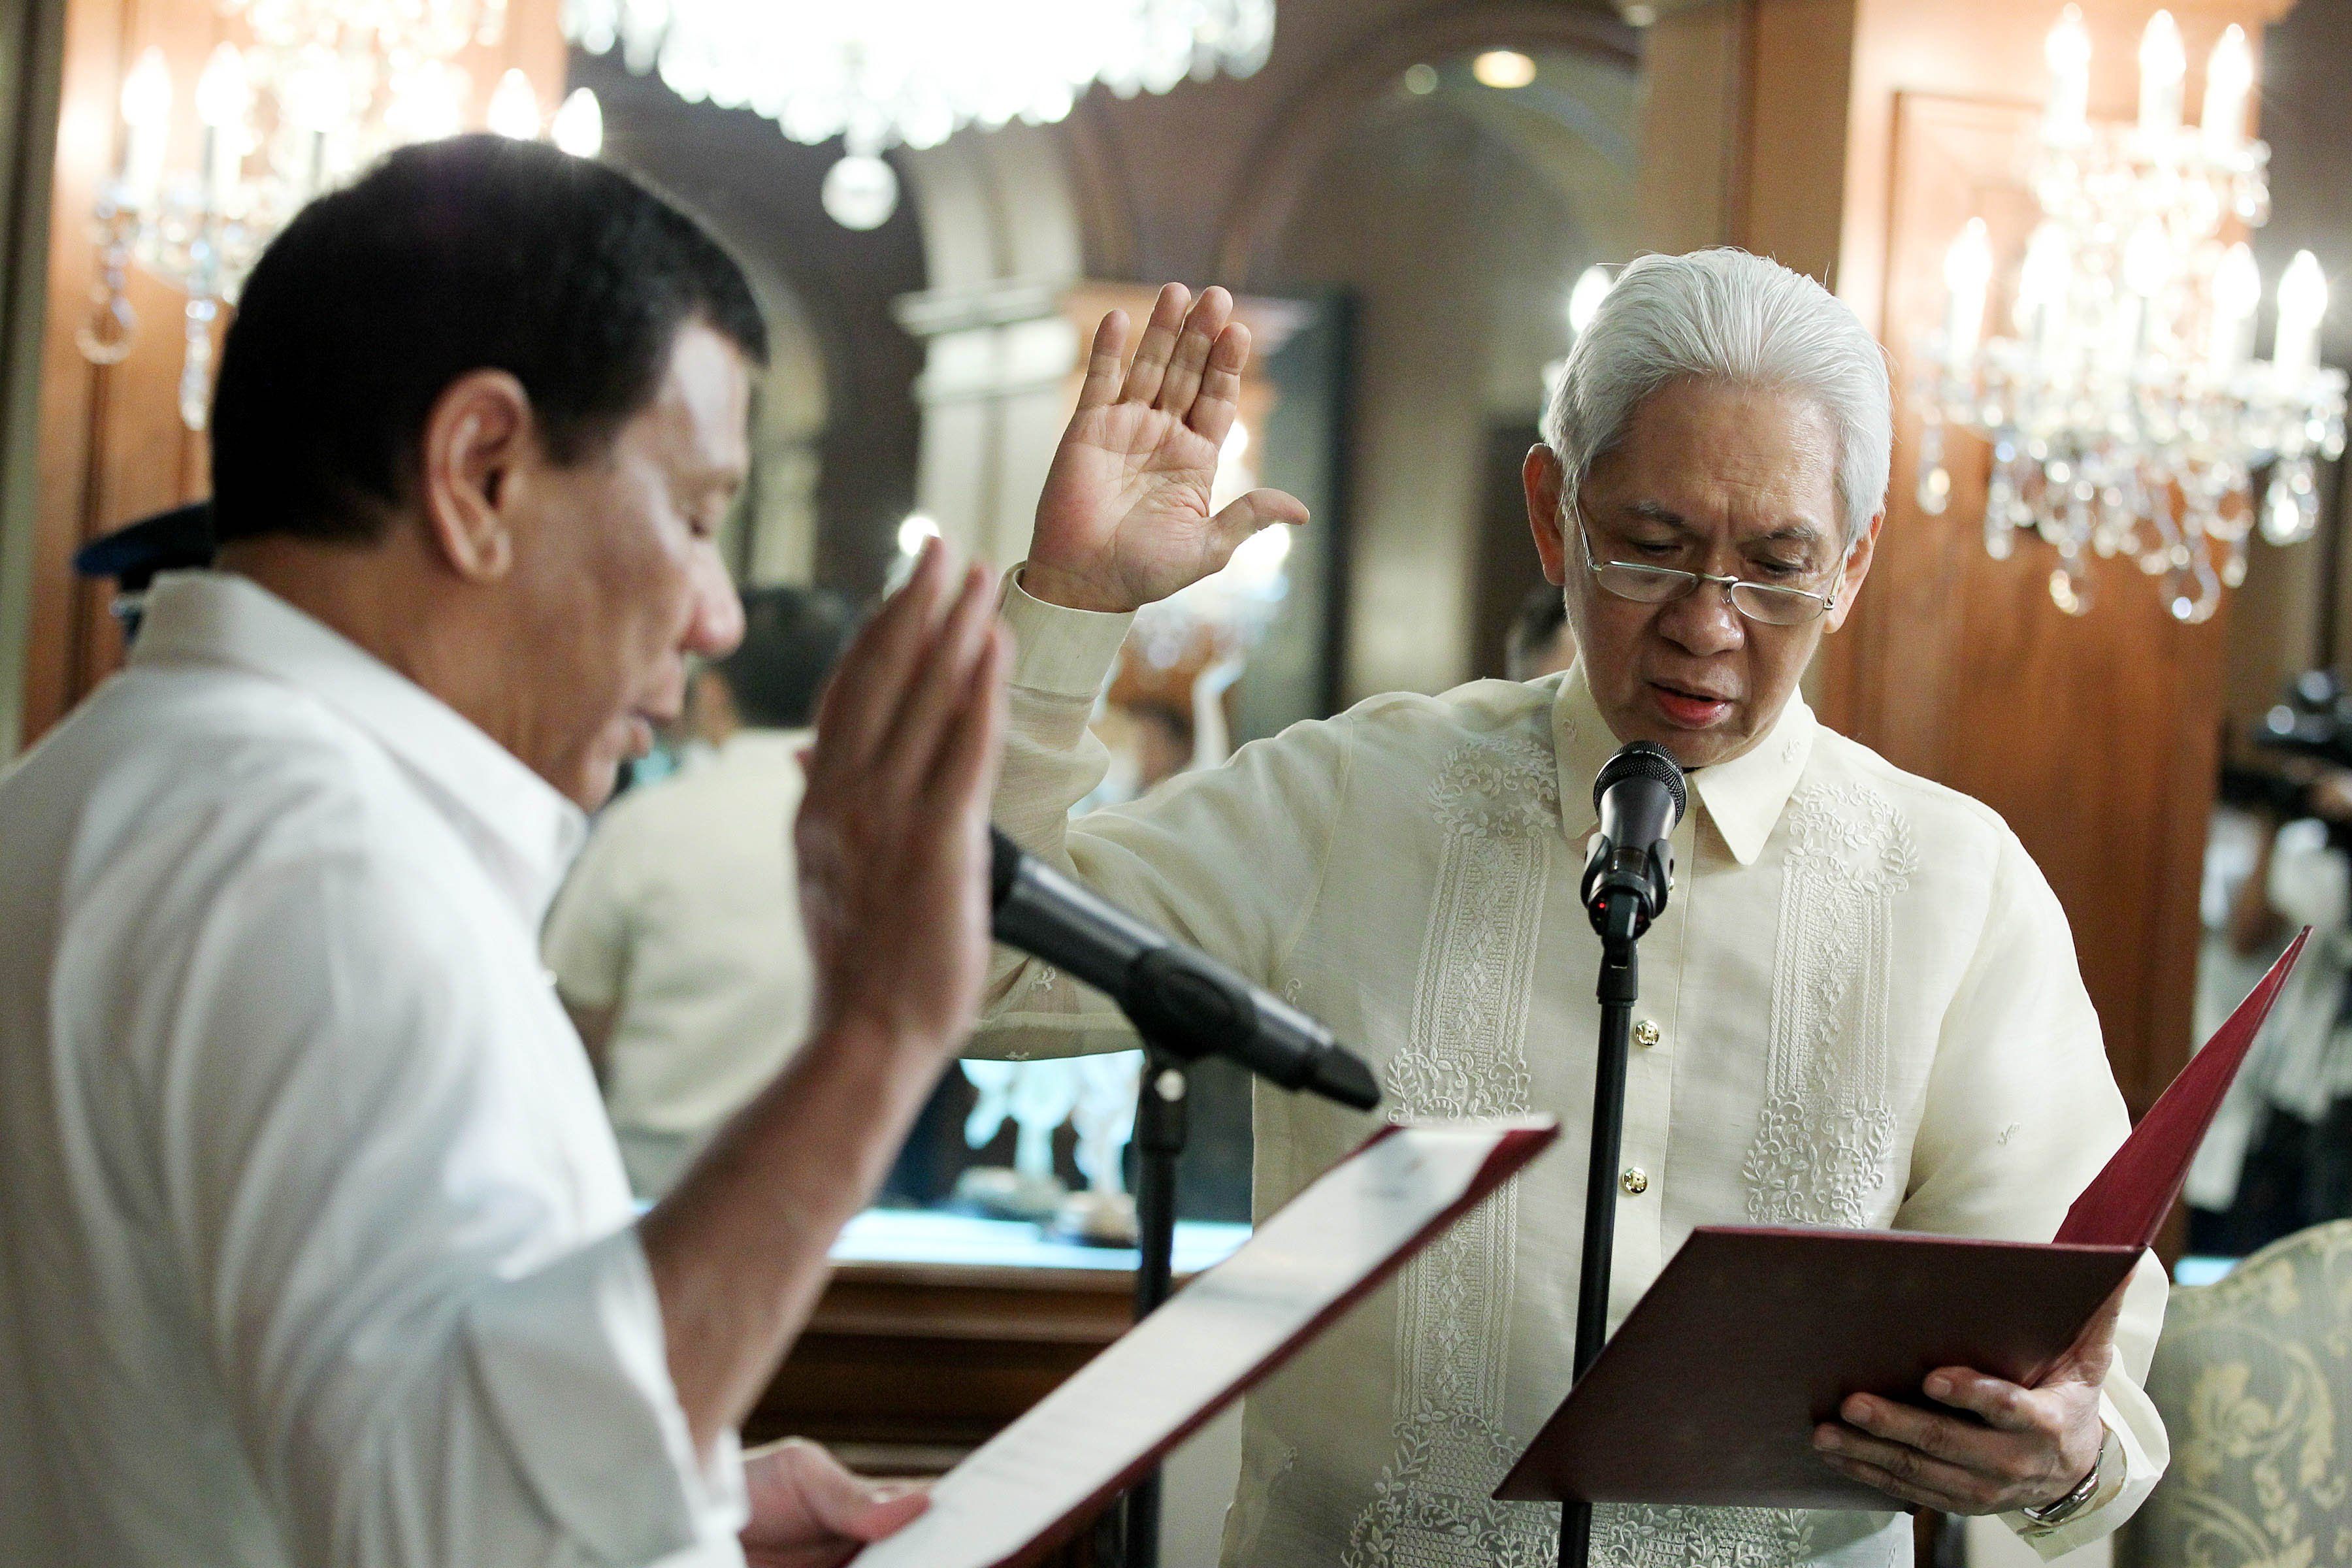 Pres. Duterte administers Martires' oath as new SC justice